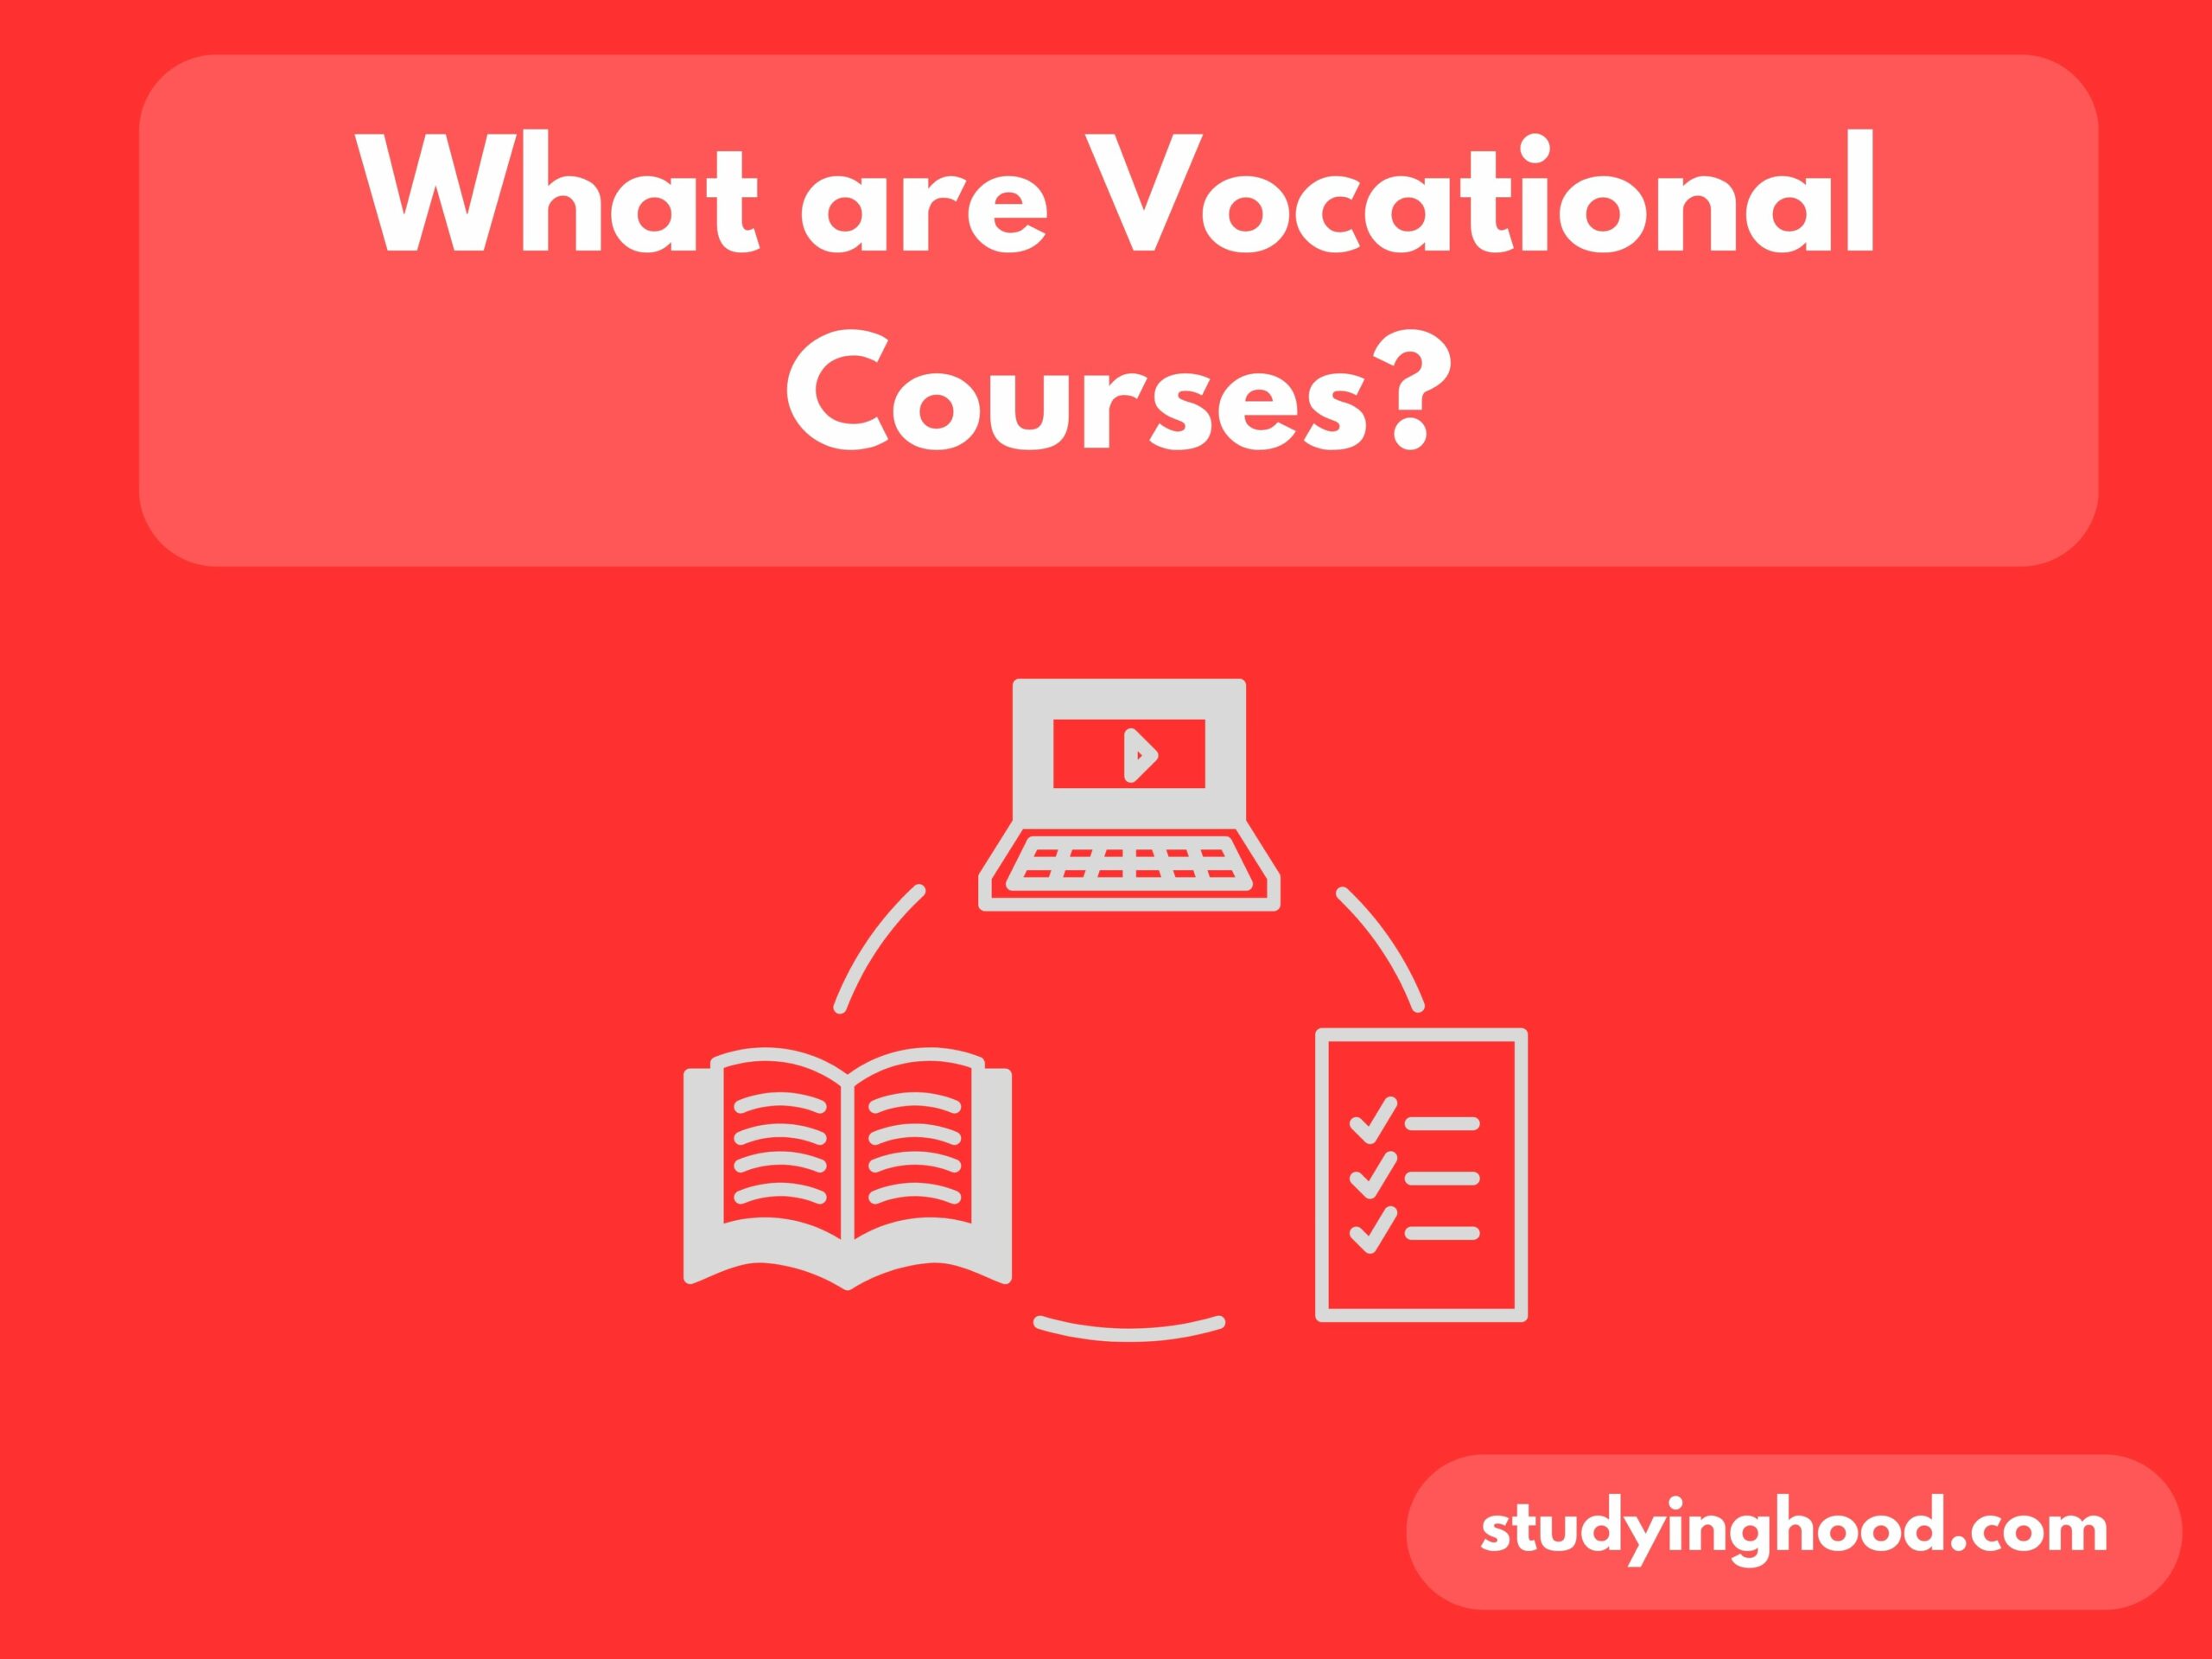 What are Vocational Courses